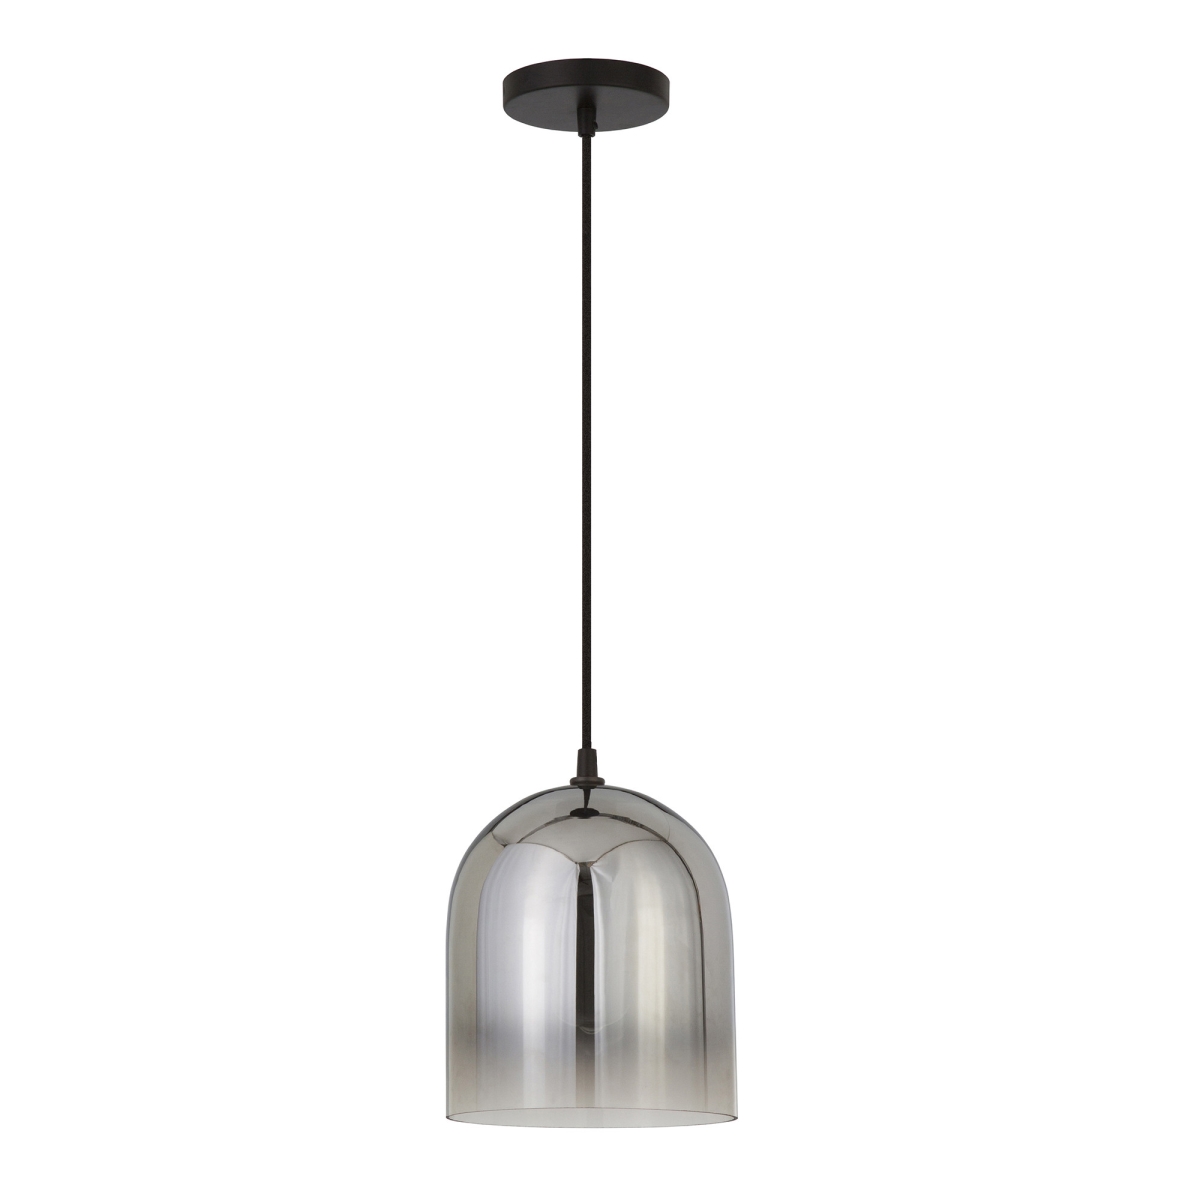 Picture of HomeRoots 518555 8 x 10 x 10 in. Gray Smoked Glass Dimmable Bell Shape Pendent Ceiling Light